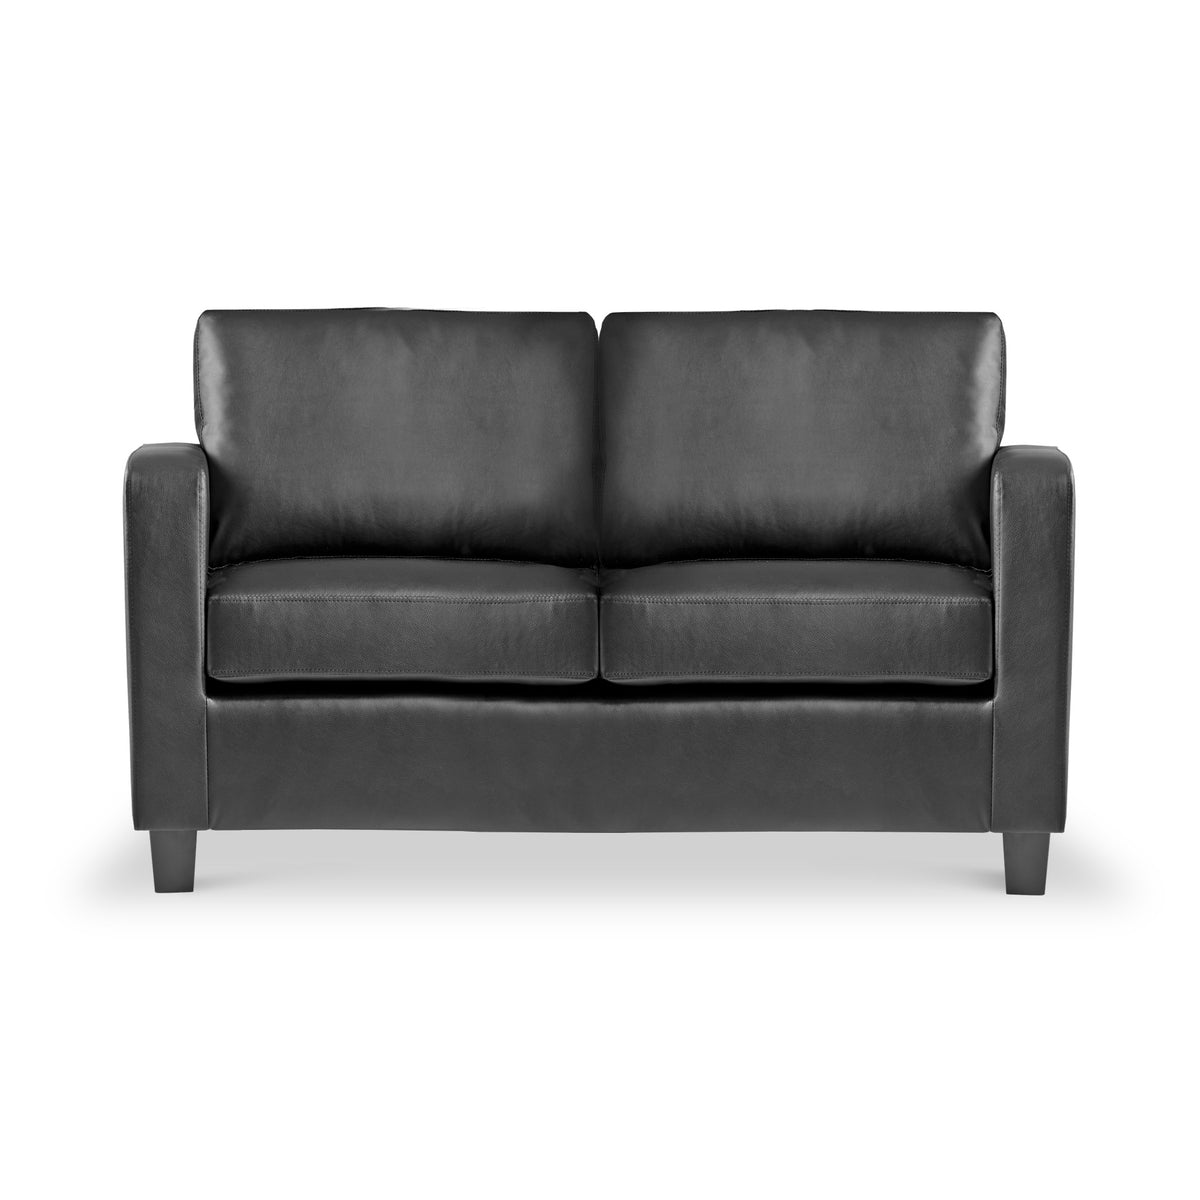 Cullen Faux Leather 2 Seater Sofa from Roseland Furniture